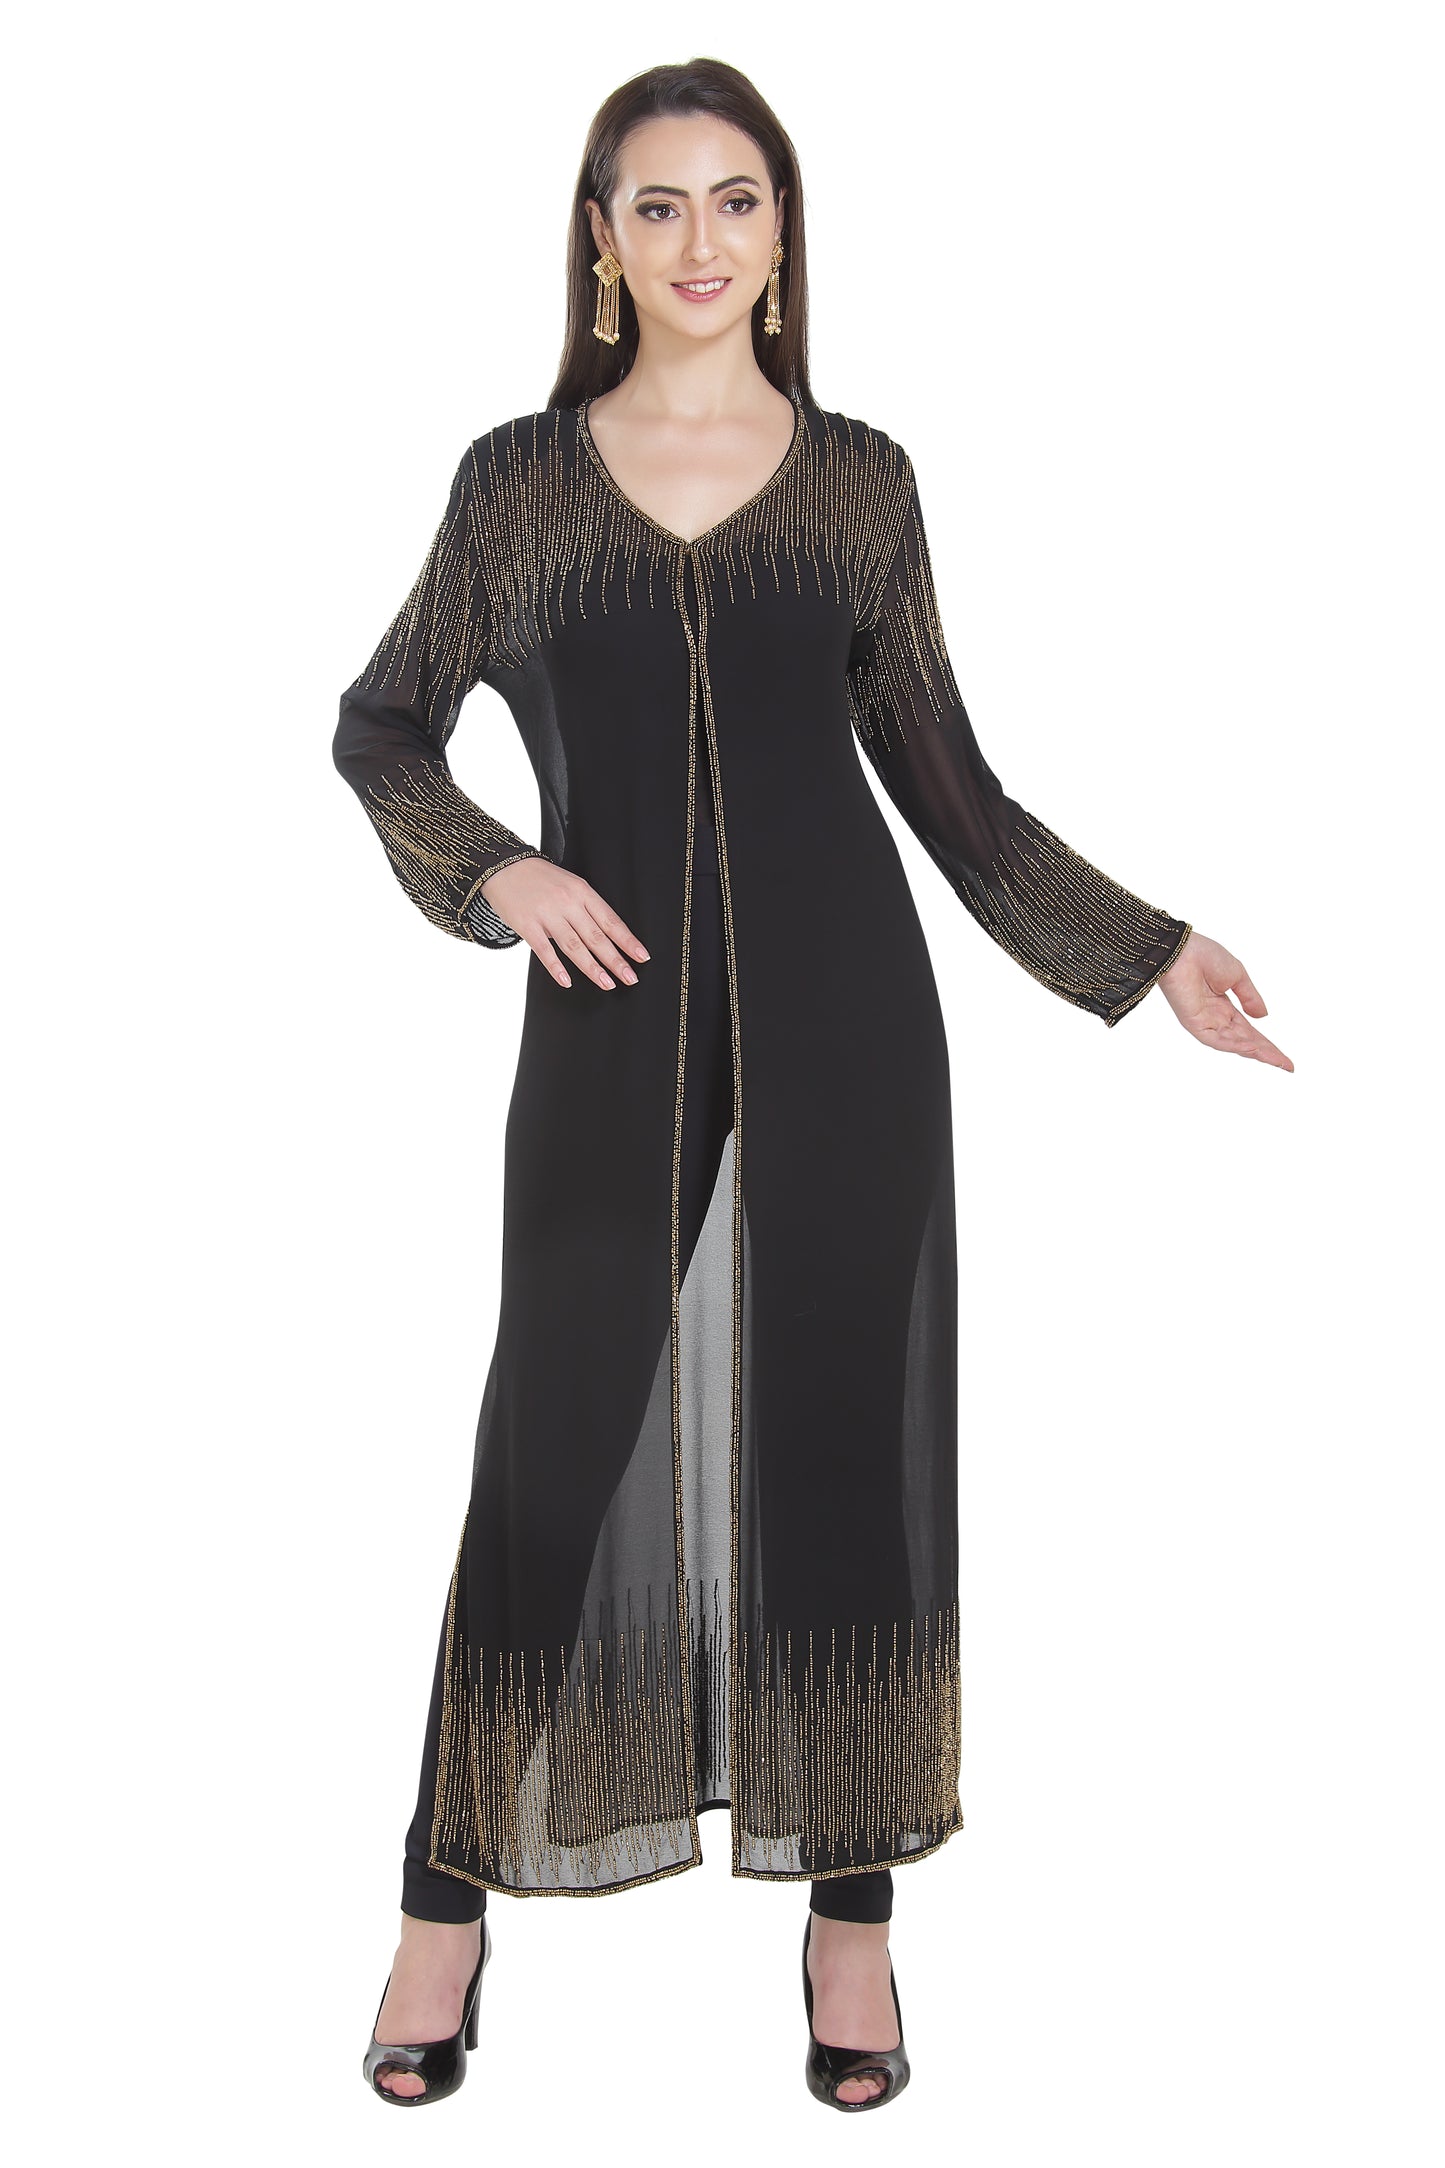 Buy Alam Collection Casual Crepe and Rasal Net Round-Neck 3/4 Length Sleeves  Black Kurti Fancy Designer Kurtis (L) at Amazon.in